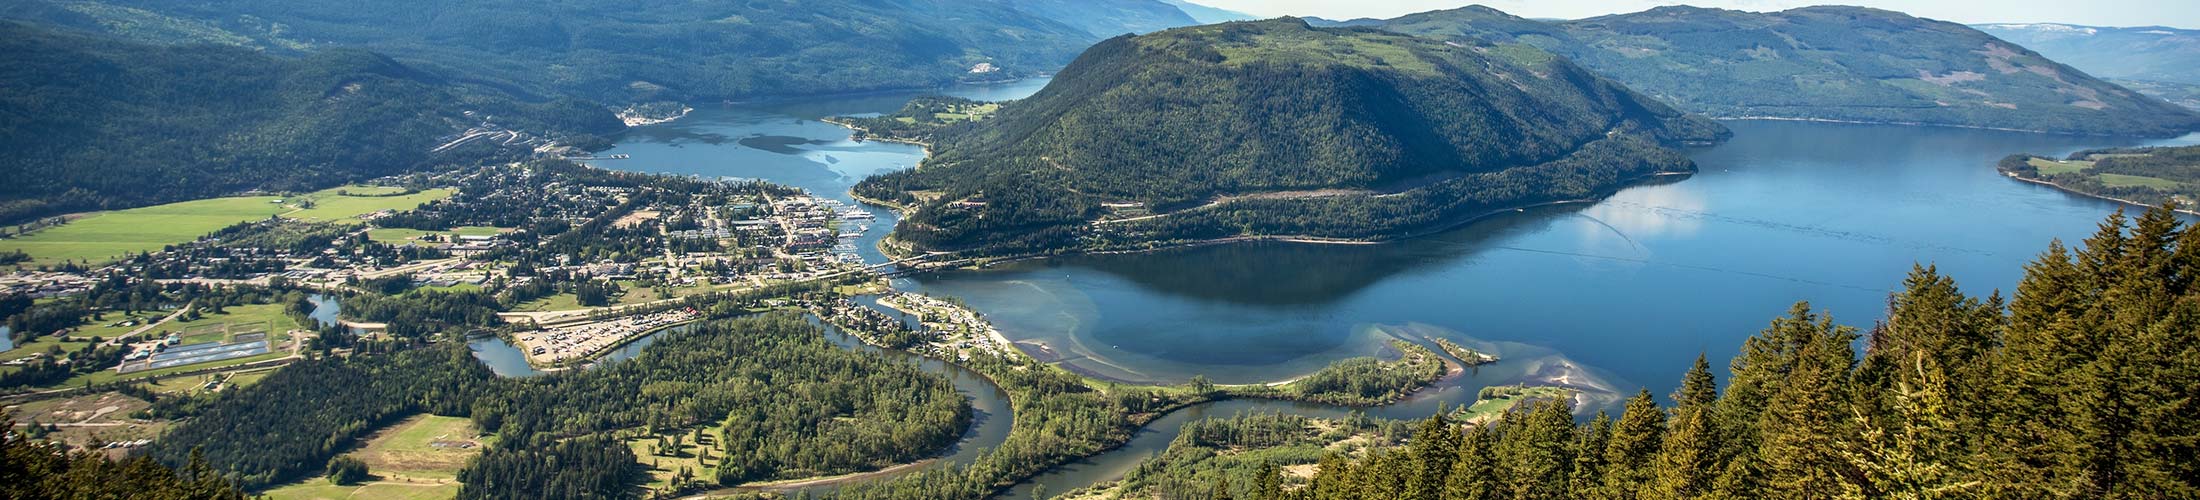 The Sicamous lookout over looking the Sicamous townsite and Shuswap Lake